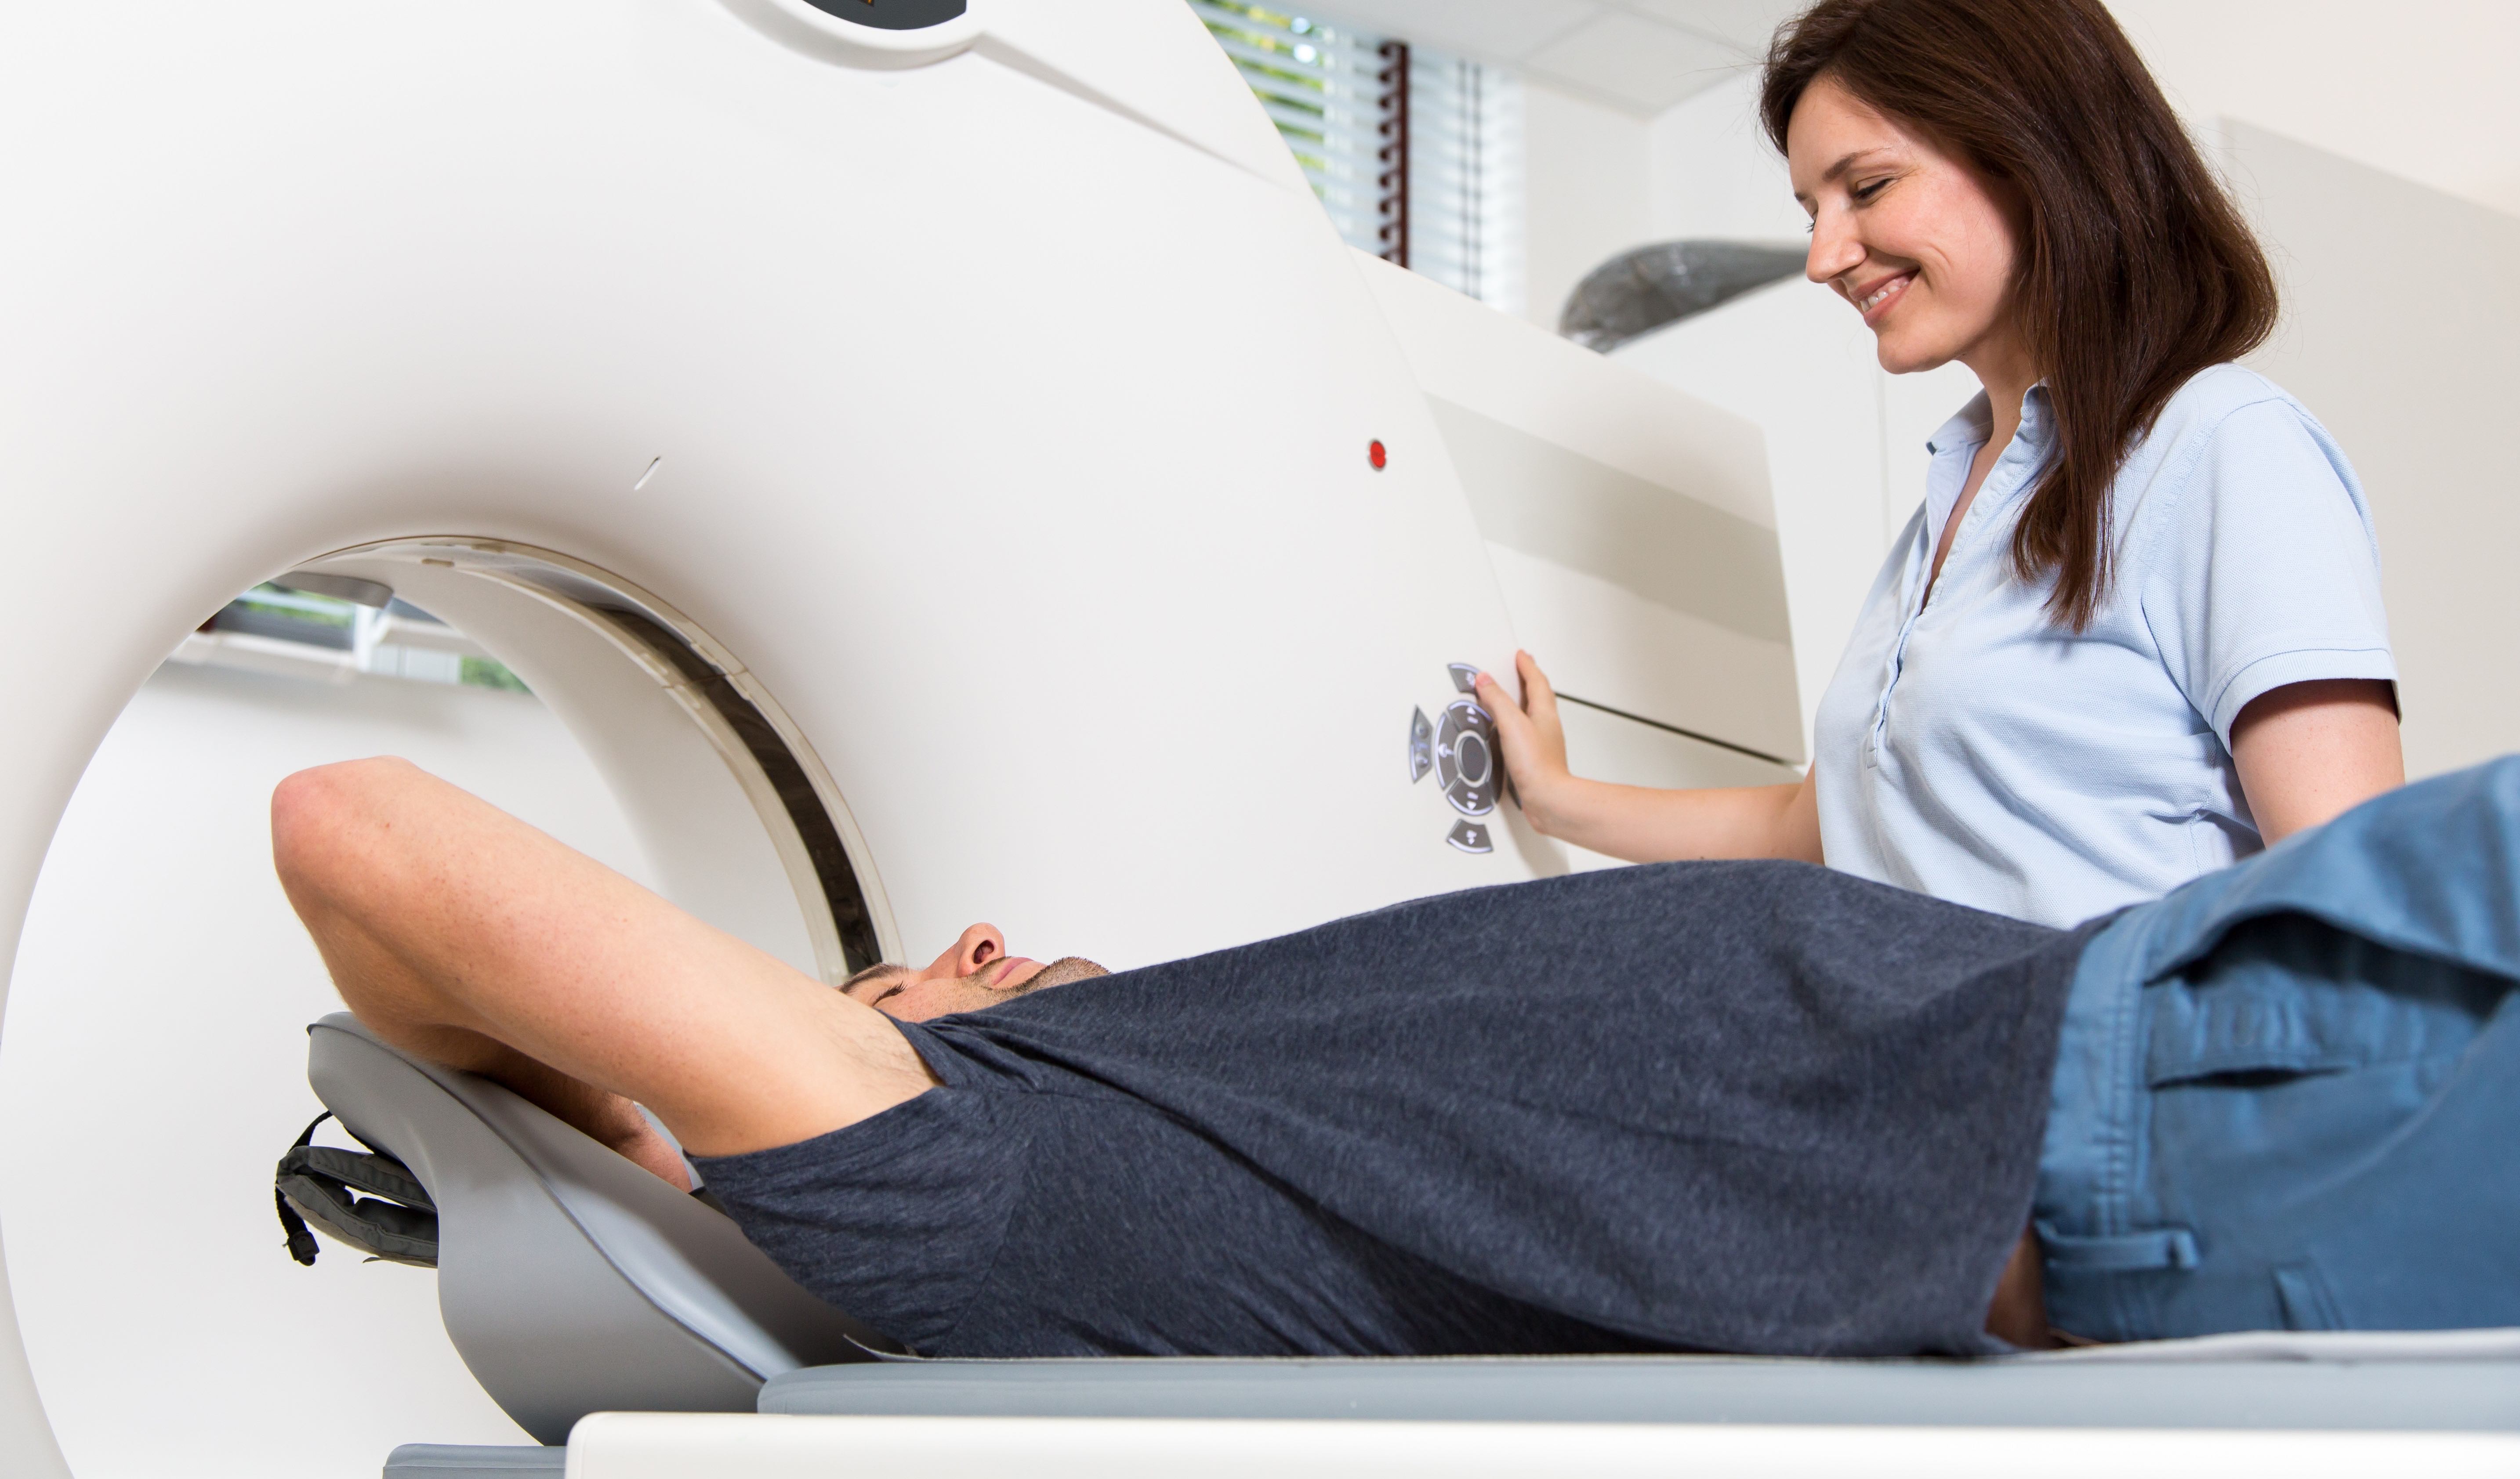 Does amerigroup cover ct scans innovative changes in the healthcare industry